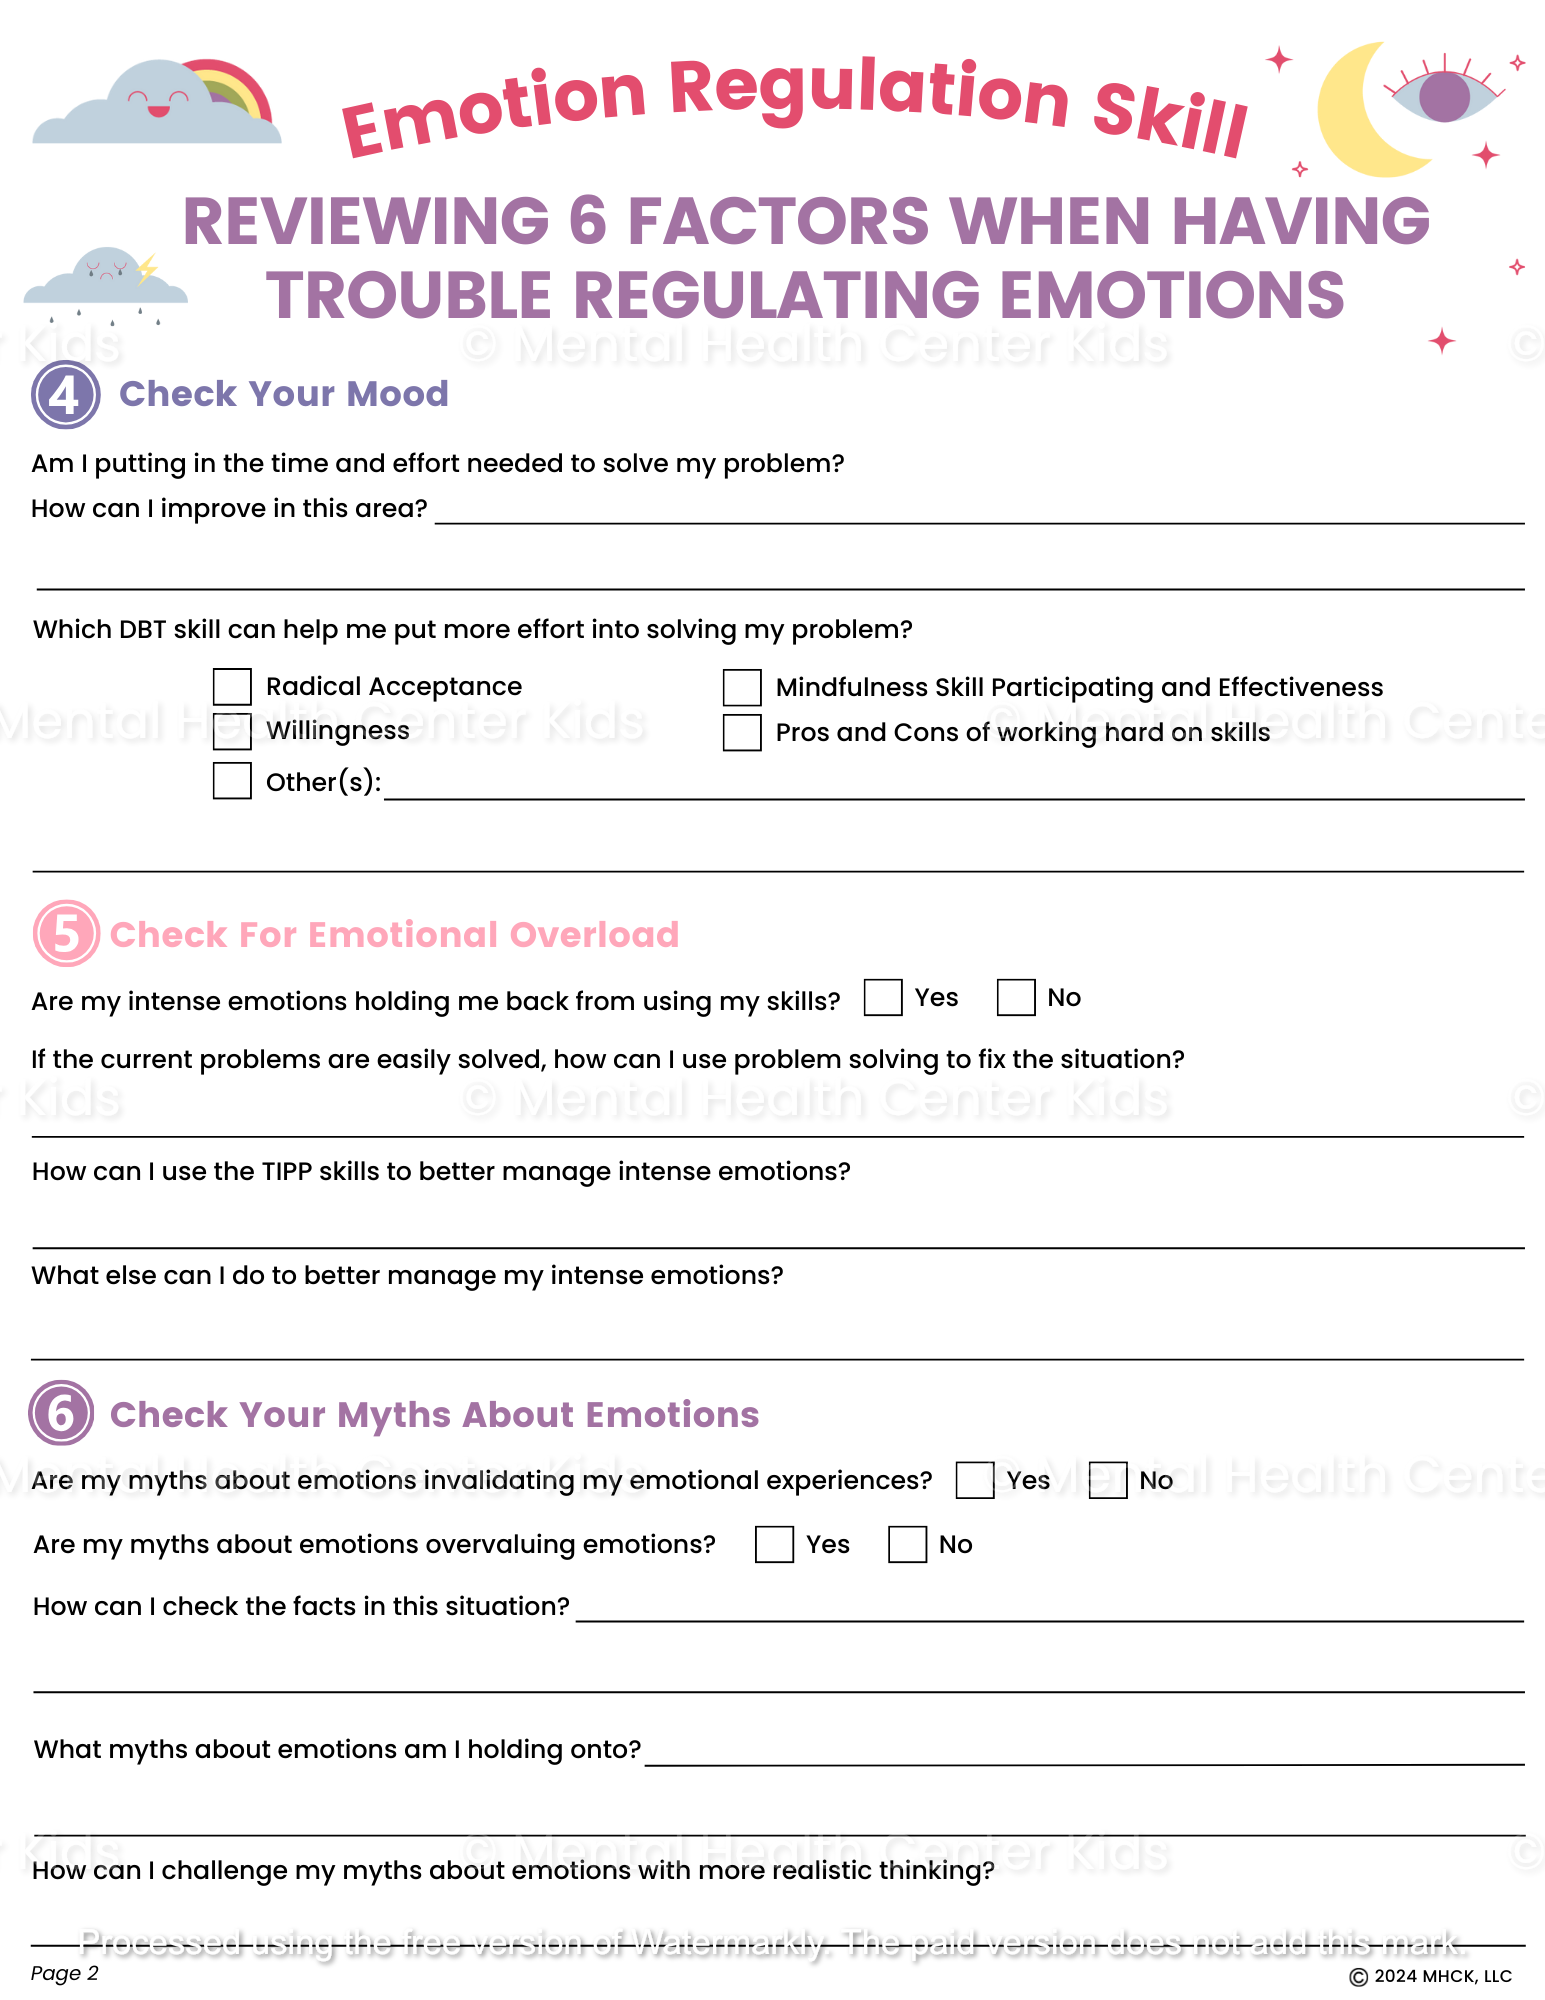 dbt worksheet what makes it hard to regulate emotions